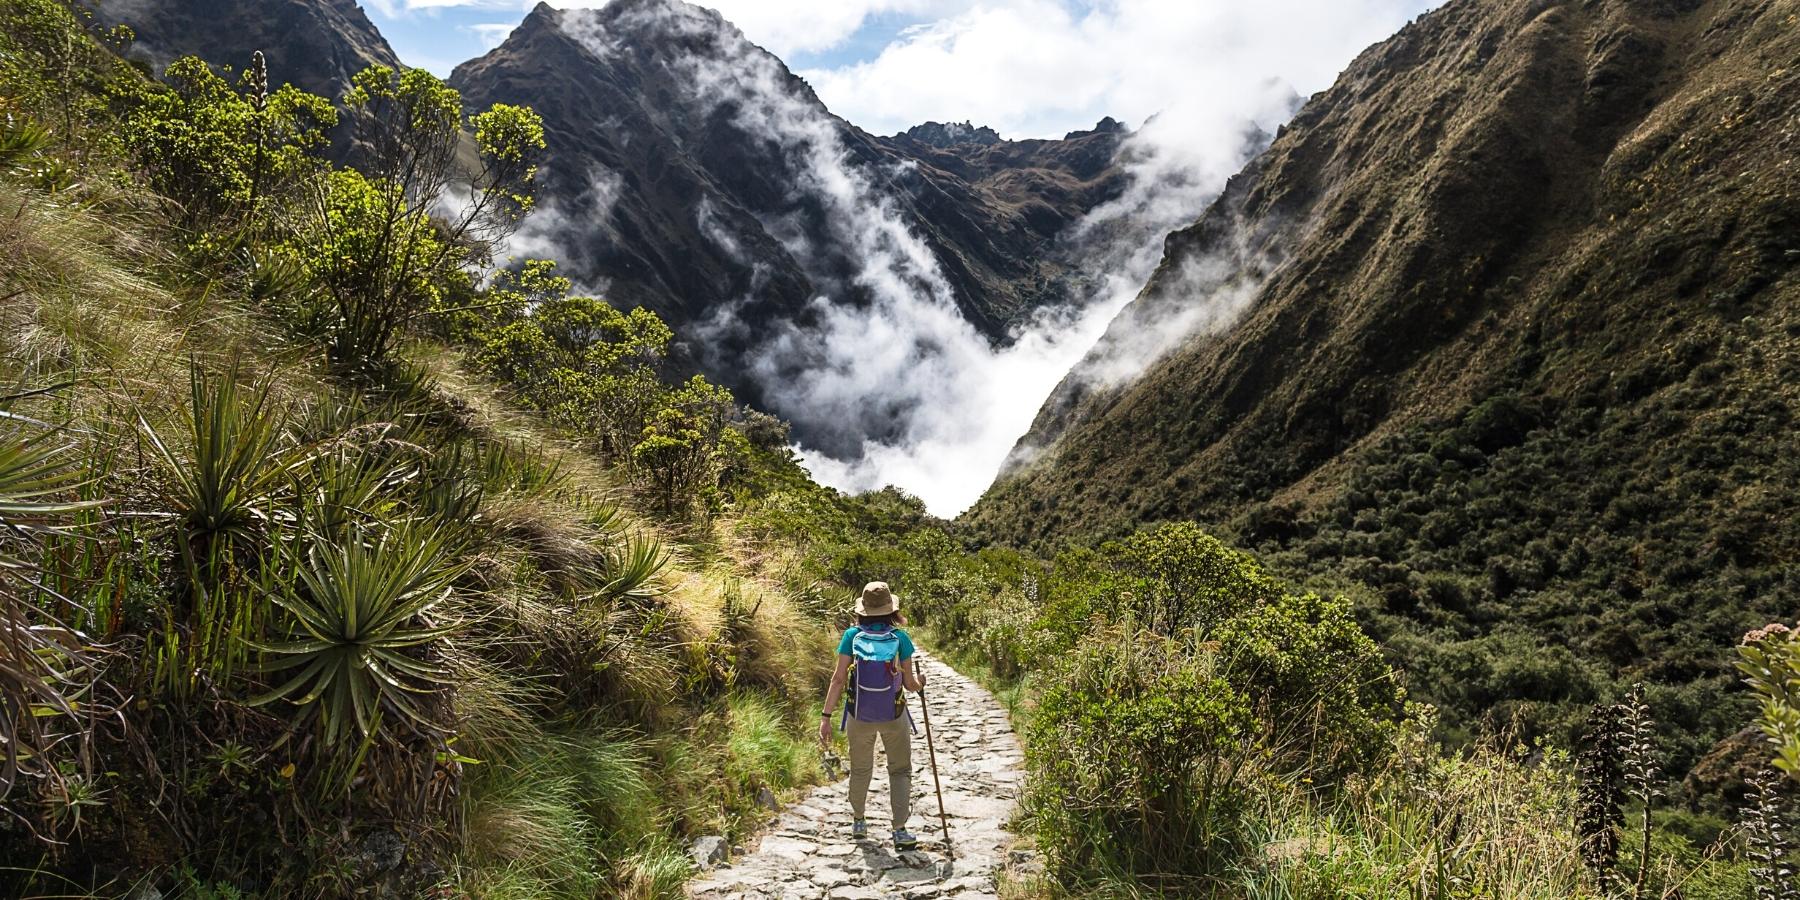 ALL ABOUT THE INCA TRAIL TO MACHU PICCHU